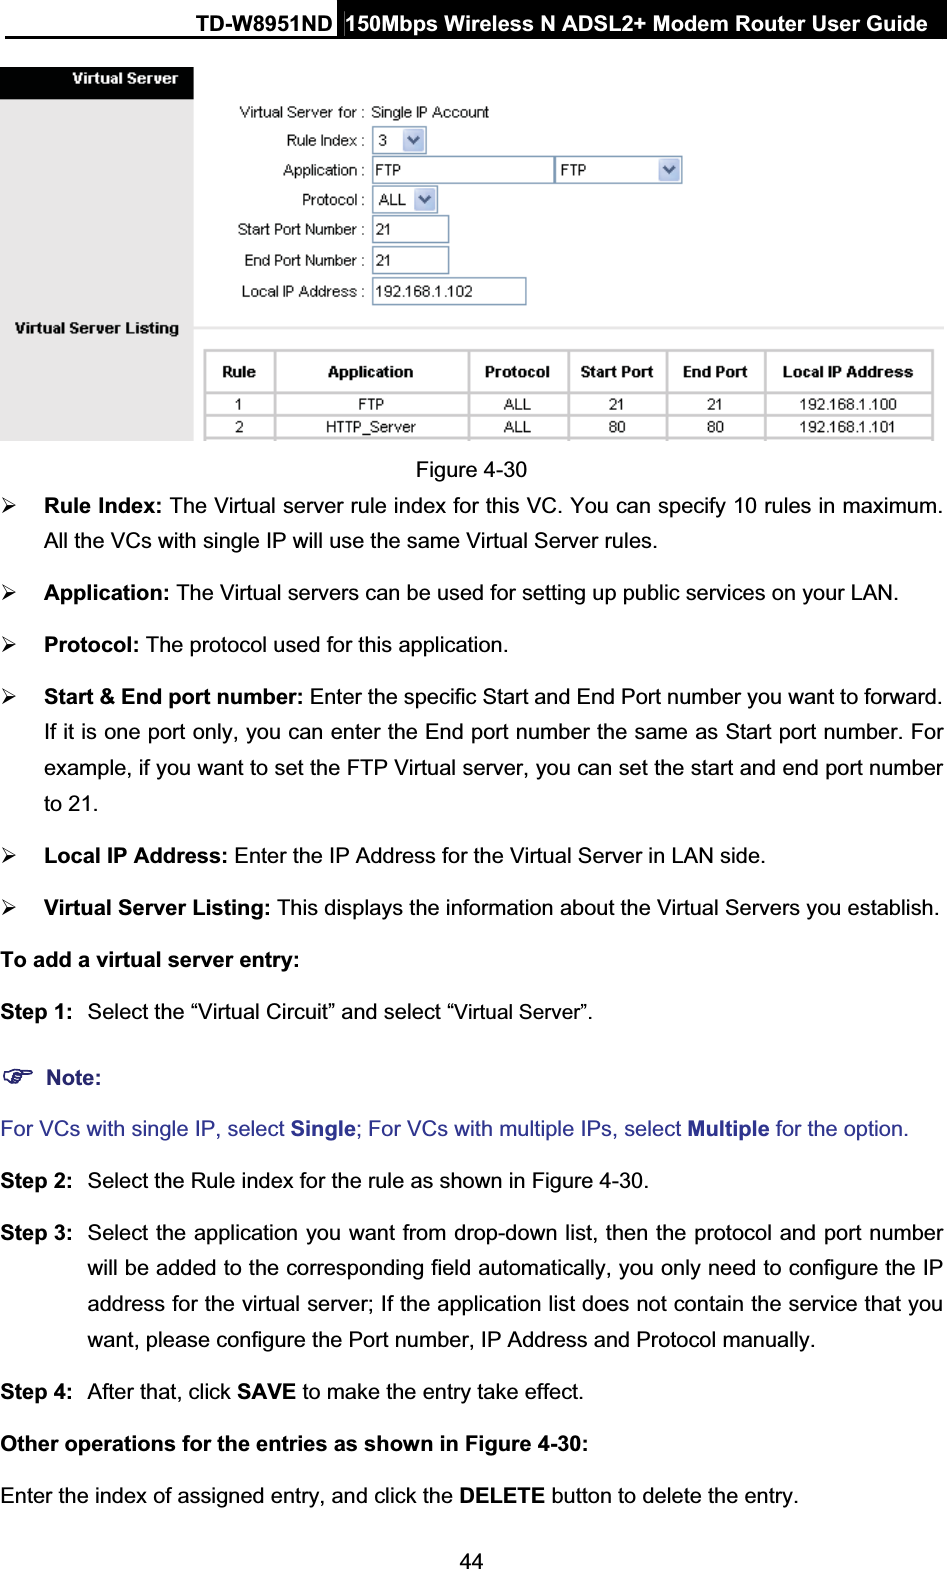 TD-W8951ND  150Mbps Wireless N ADSL2+ Modem Router User Guide44Figure 4-30 ¾Rule Index: The Virtual server rule index for this VC. You can specify 10 rules in maximum. All the VCs with single IP will use the same Virtual Server rules. ¾Application: The Virtual servers can be used for setting up public services on your LAN. ¾Protocol: The protocol used for this application.¾Start &amp; End port number: Enter the specific Start and End Port number you want to forward. If it is one port only, you can enter the End port number the same as Start port number. For example, if you want to set the FTP Virtual server, you can set the start and end port number to 21. ¾Local IP Address: Enter the IP Address for the Virtual Server in LAN side. ¾Virtual Server Listing: This displays the information about the Virtual Servers you establish. To add a virtual server entry:   Step 1:  Select the “Virtual Circuit” and select “Virtual Server”.)Note:For VCs with single IP, select Single; For VCs with multiple IPs, select Multiple for the option. Step 2:  Select the Rule index for the rule as shown in Figure 4-30. Step 3:  Select the application you want from drop-down list, then the protocol and port number will be added to the corresponding field automatically, you only need to configure the IP address for the virtual server; If the application list does not contain the service that you want, please configure the Port number, IP Address and Protocol manually. Step 4:  After that, click SAVE to make the entry take effect. Other operations for the entries as shown in Figure 4-30: Enter the index of assigned entry, and click the DELETE button to delete the entry. 